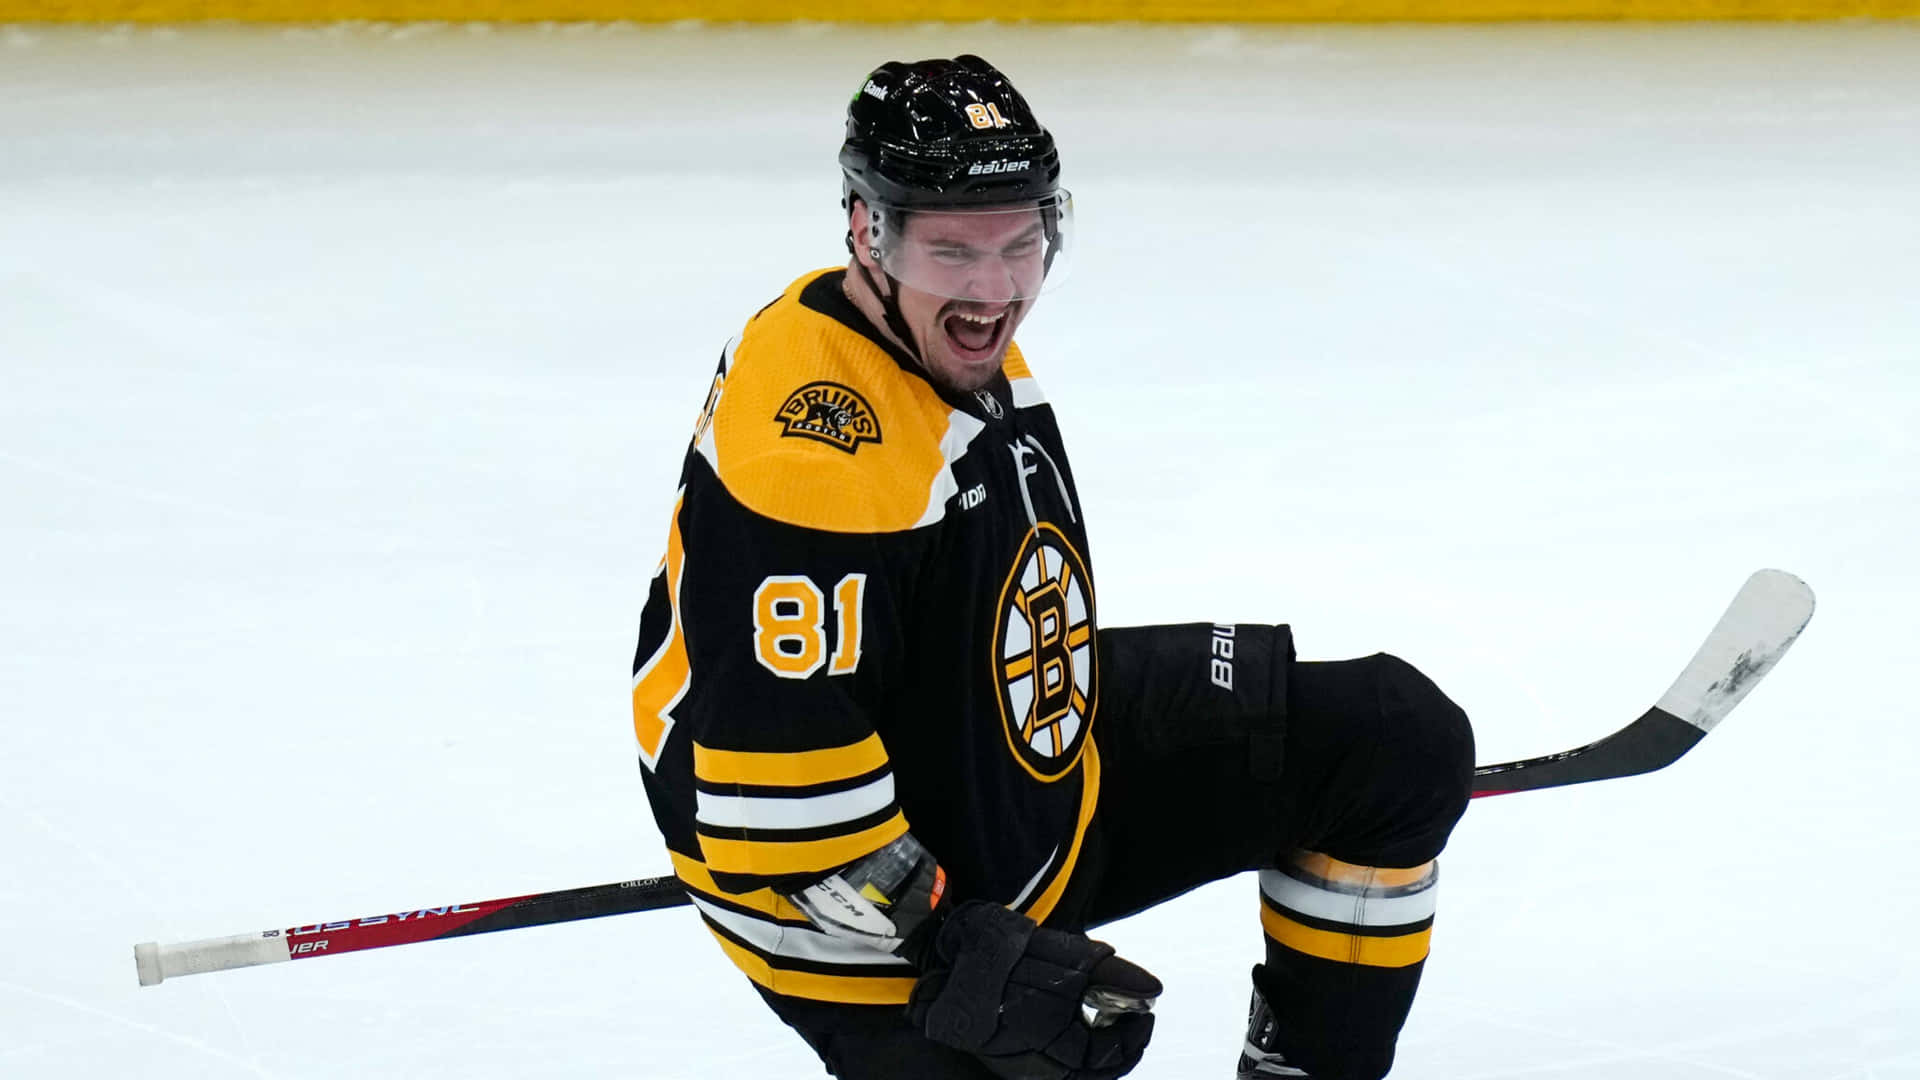 Go Bruins: Celebrating Success On And Off The Ice